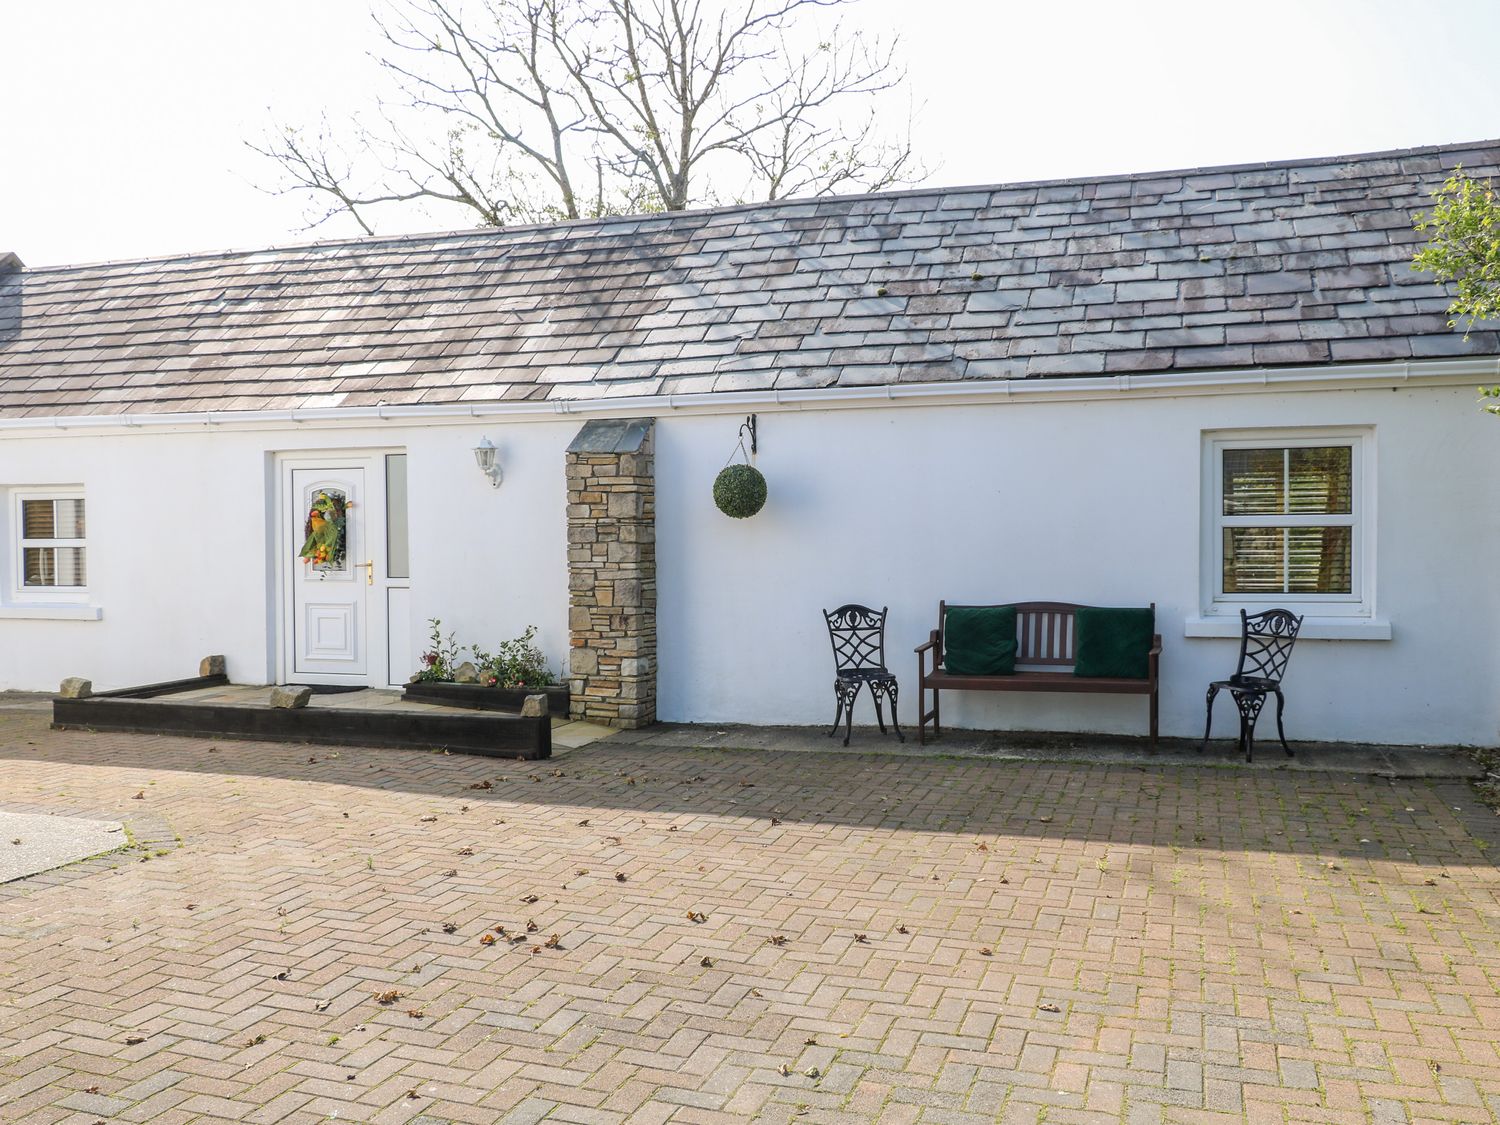 Riverside Cottage - County Donegal - 1054946 - photo 1